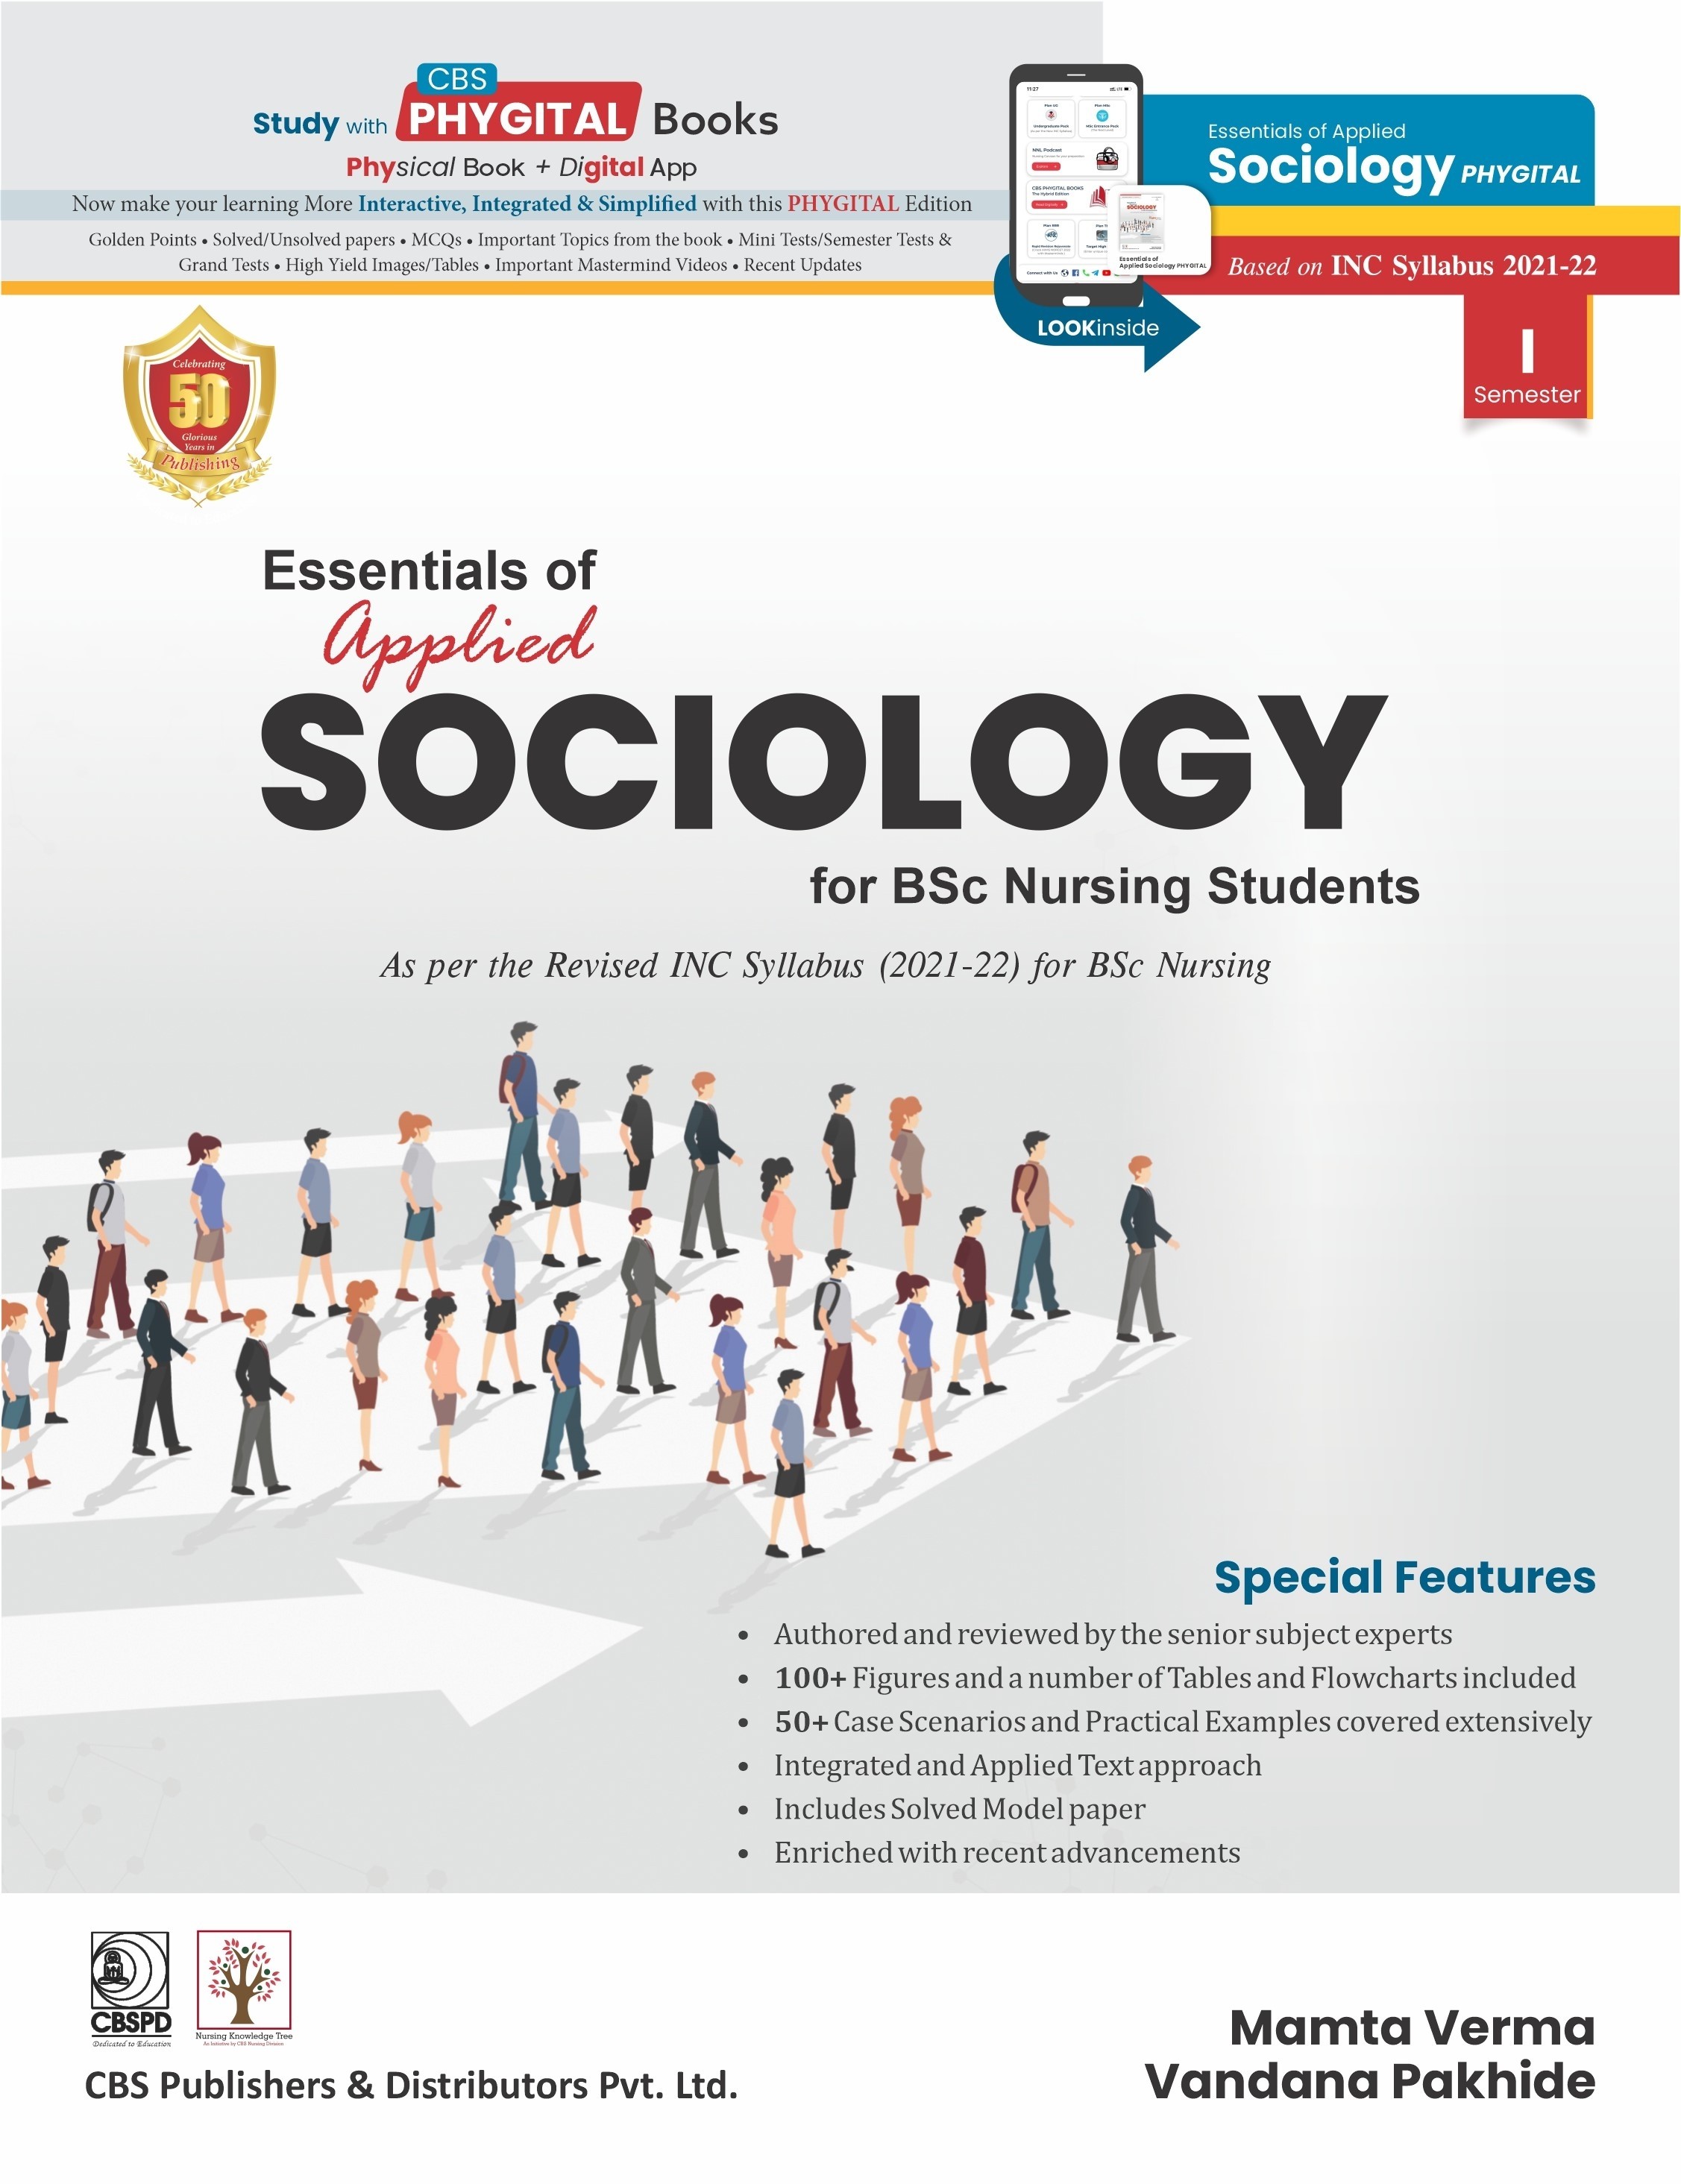 Essentials of Applied Sociology for BSc Nursing Students